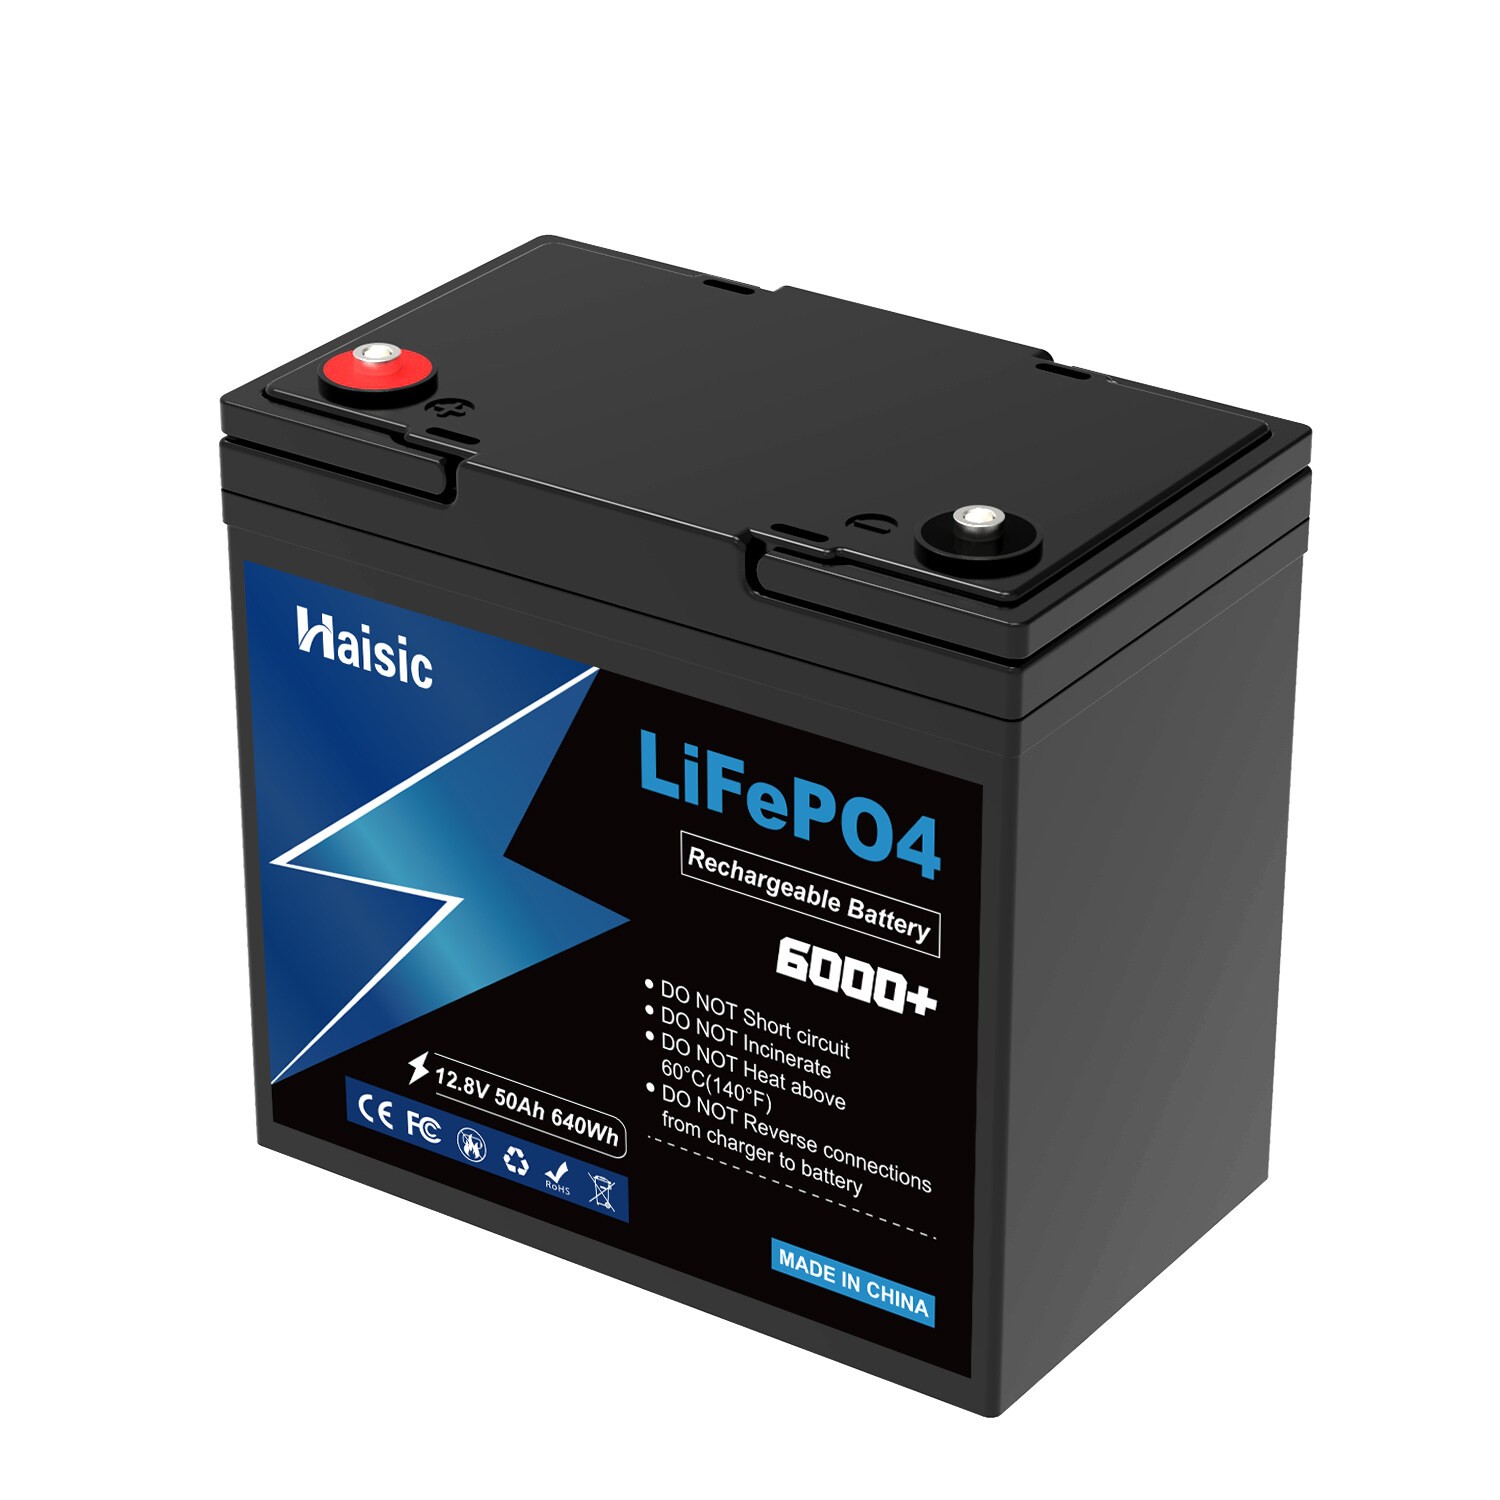 12.8V 640Wh LifePO4 battery packs with solar panel